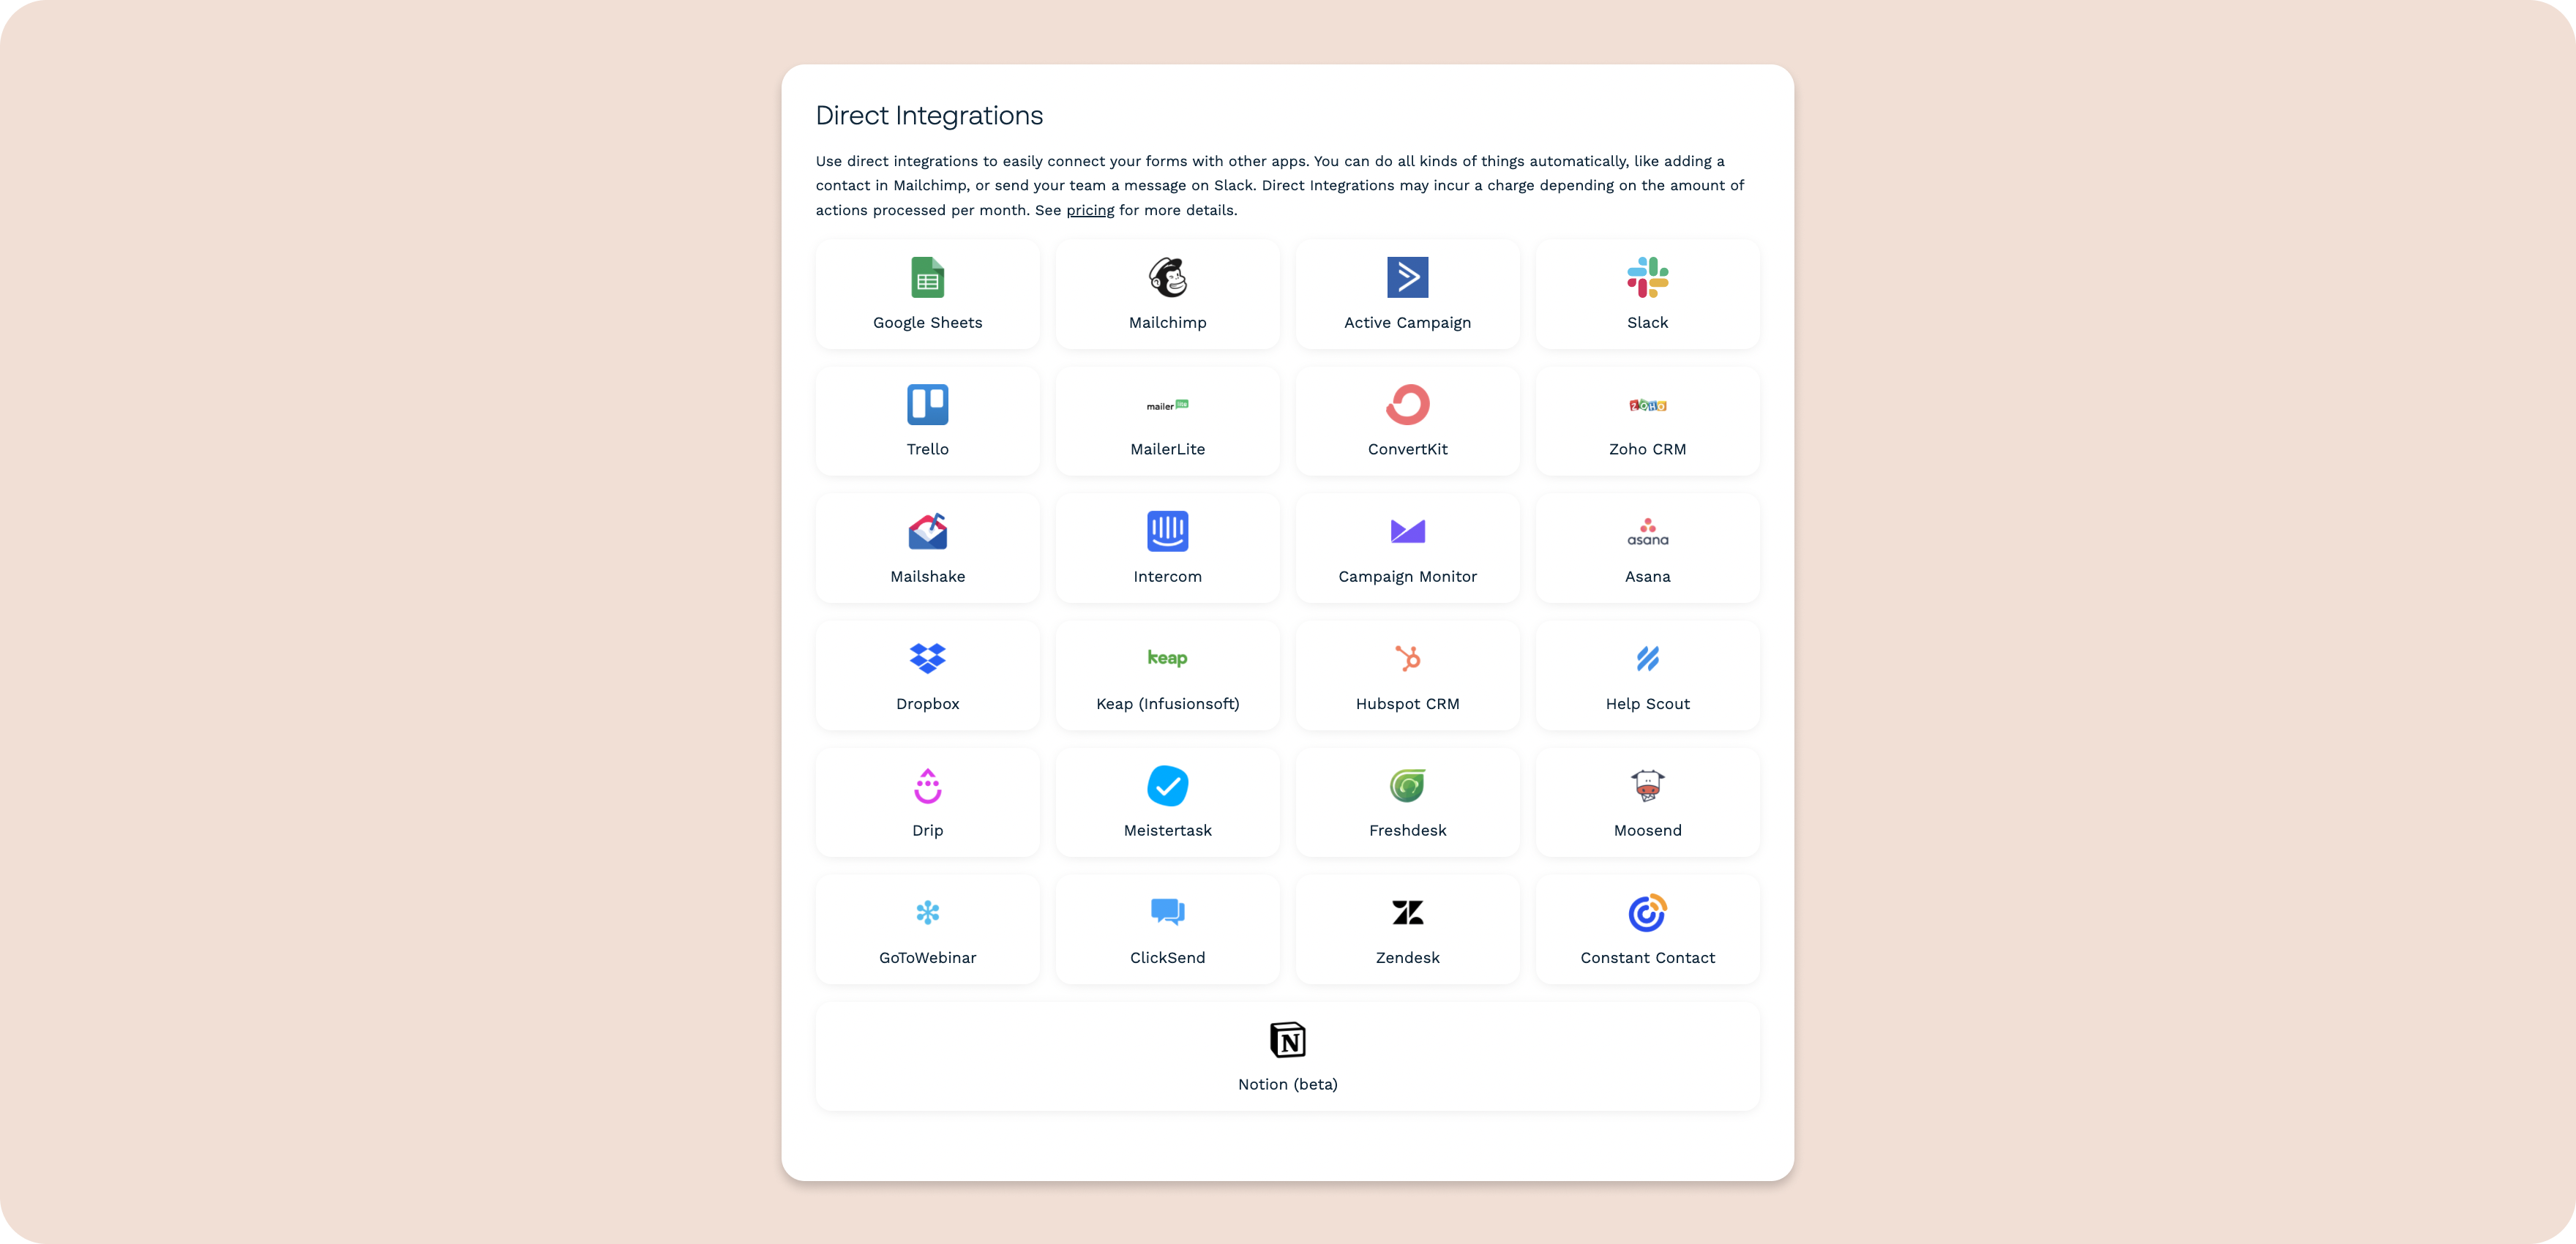 Image showcasing many different integrations offered by Paperform service